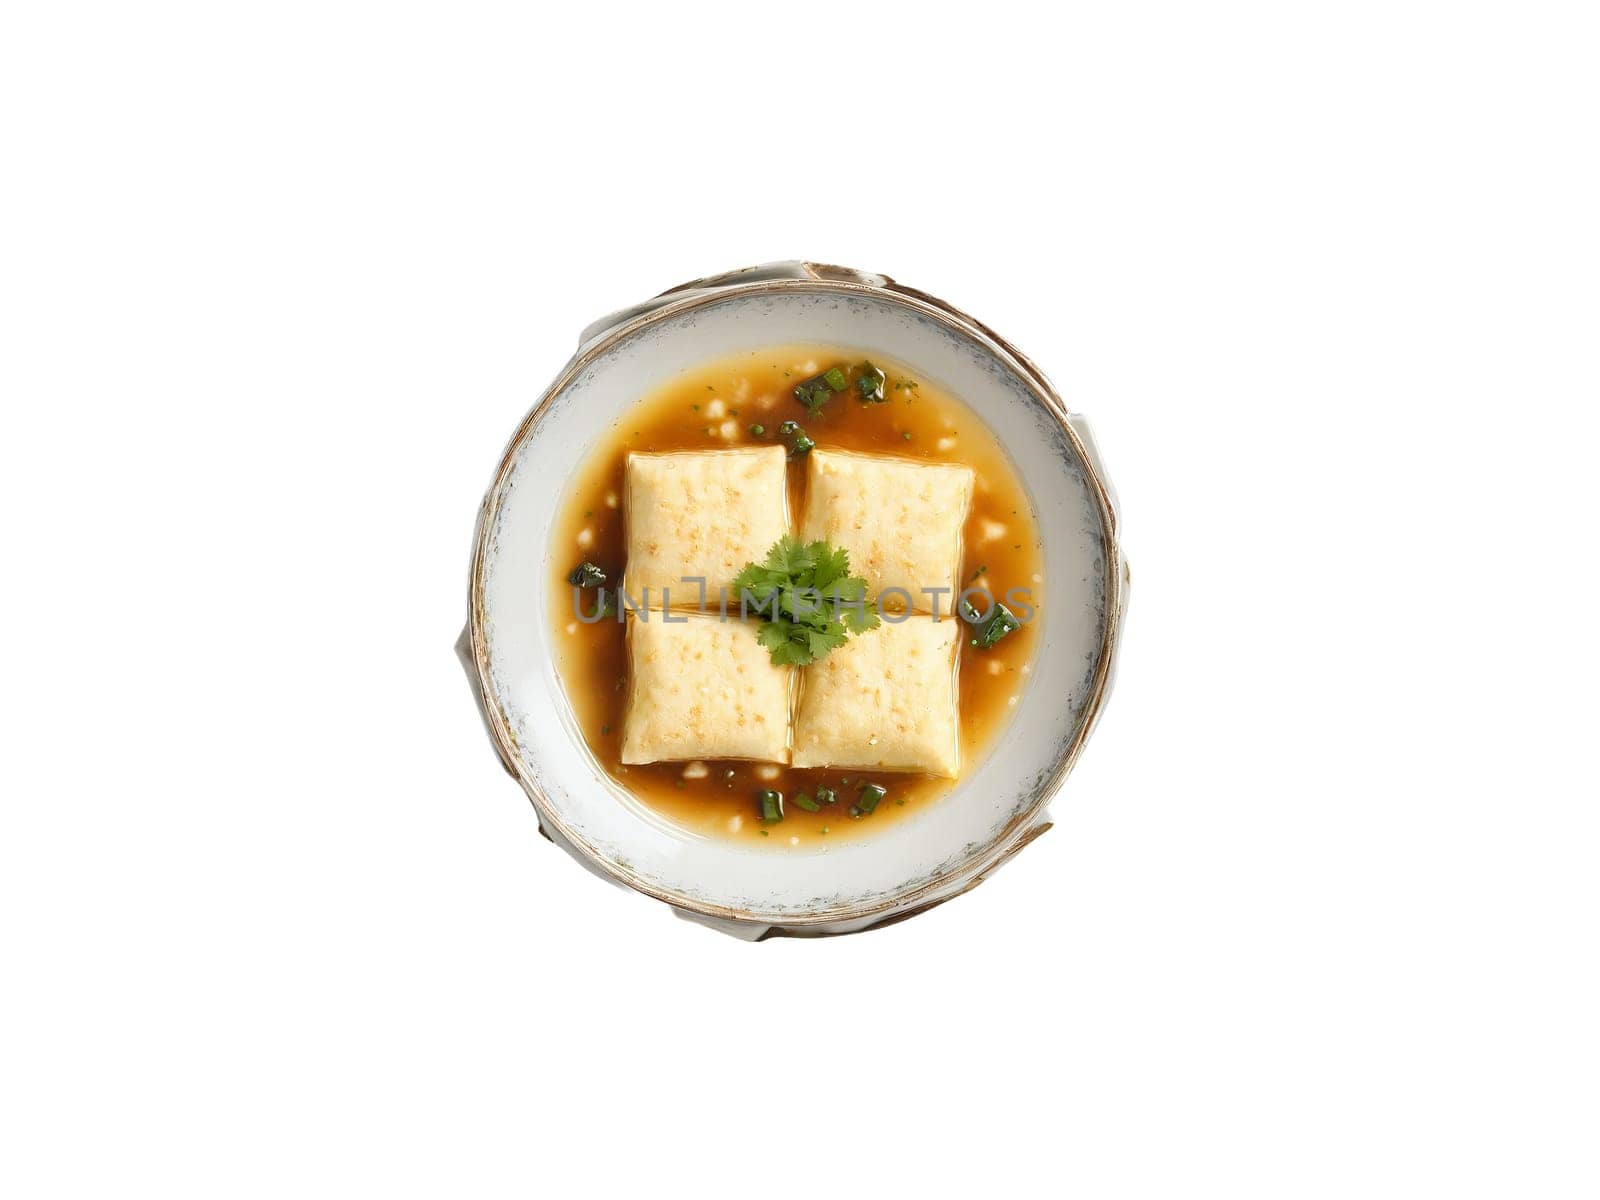 Agedashi Tofu Pockets of tofu fried in a light batter and served in a savory. Food isolated on transparent background.